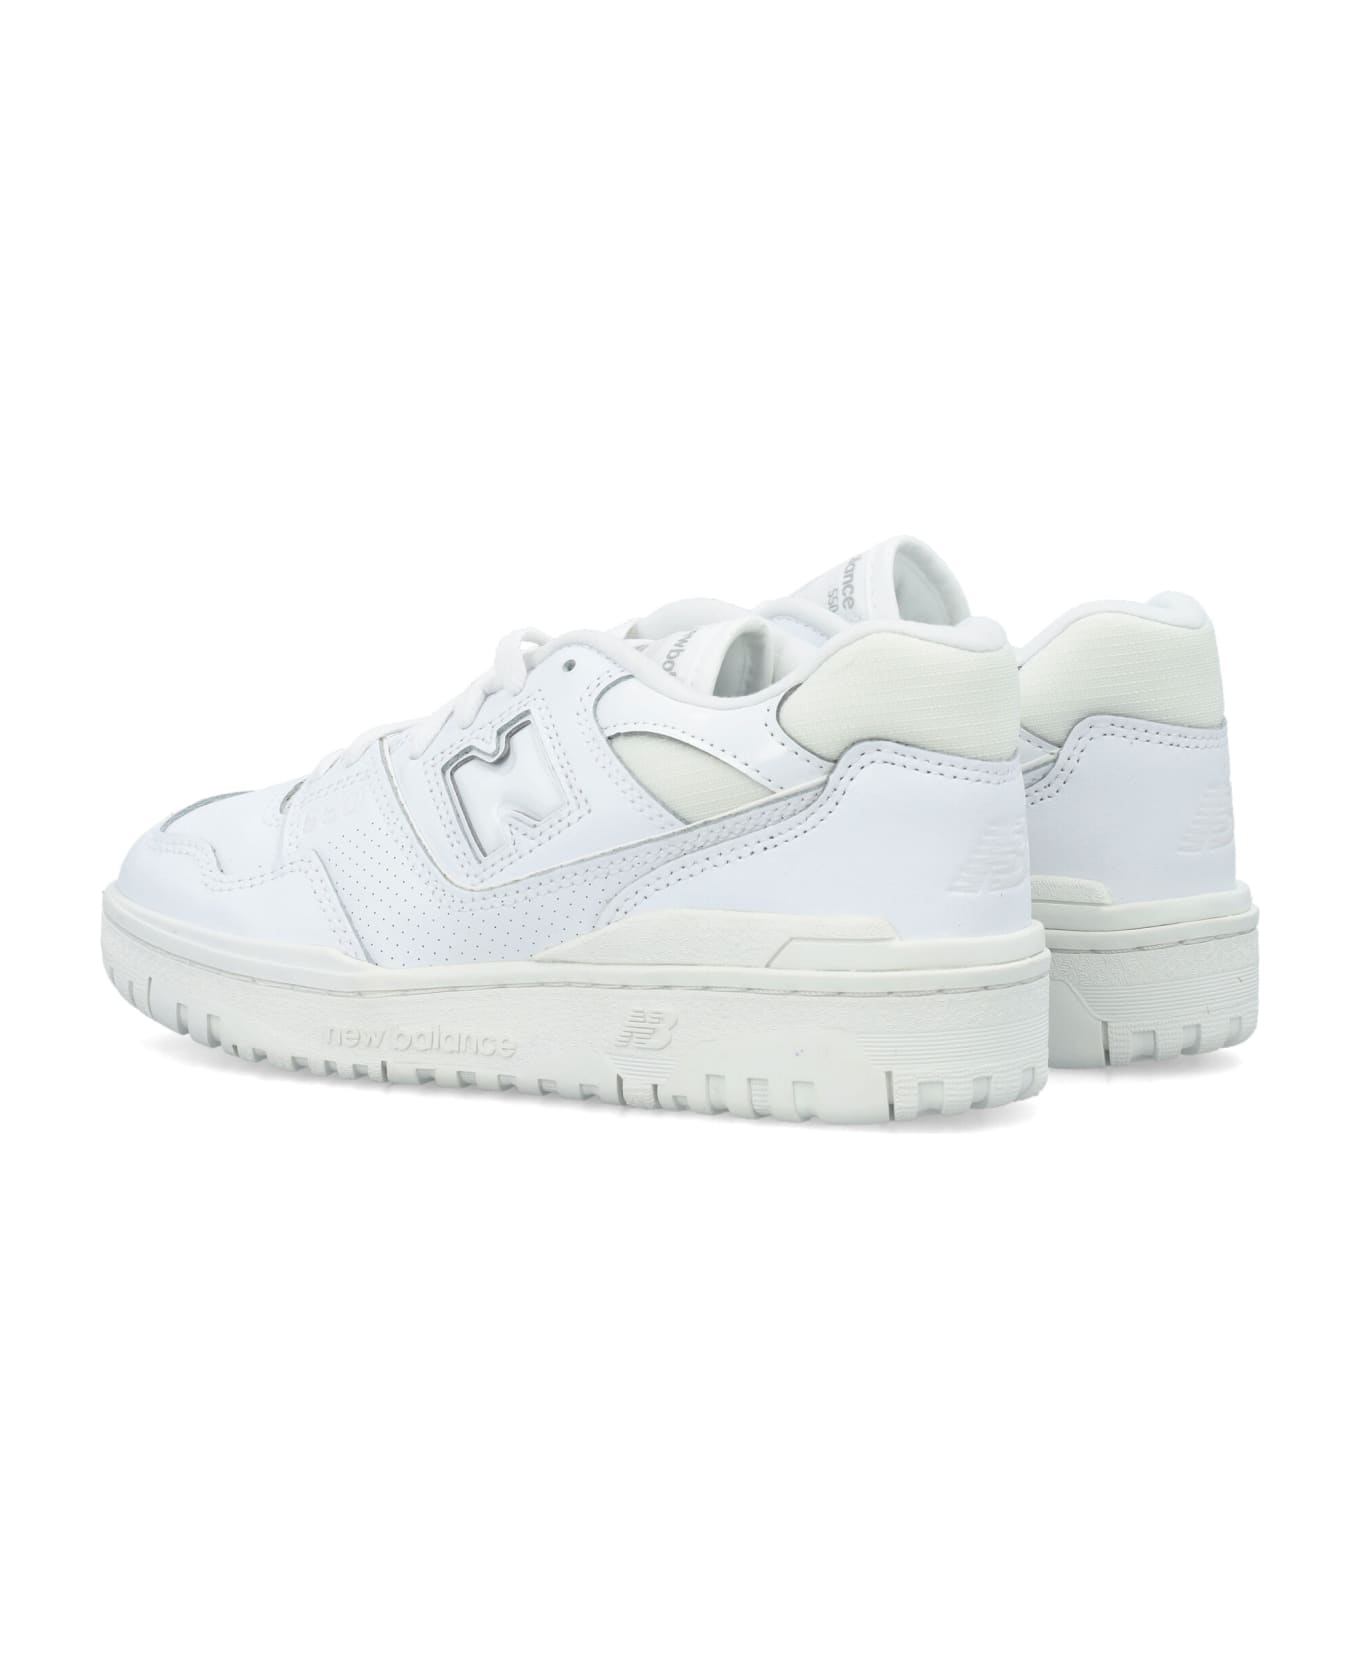 New Balance 550 Woman's Sneakers - WHITE PATENT